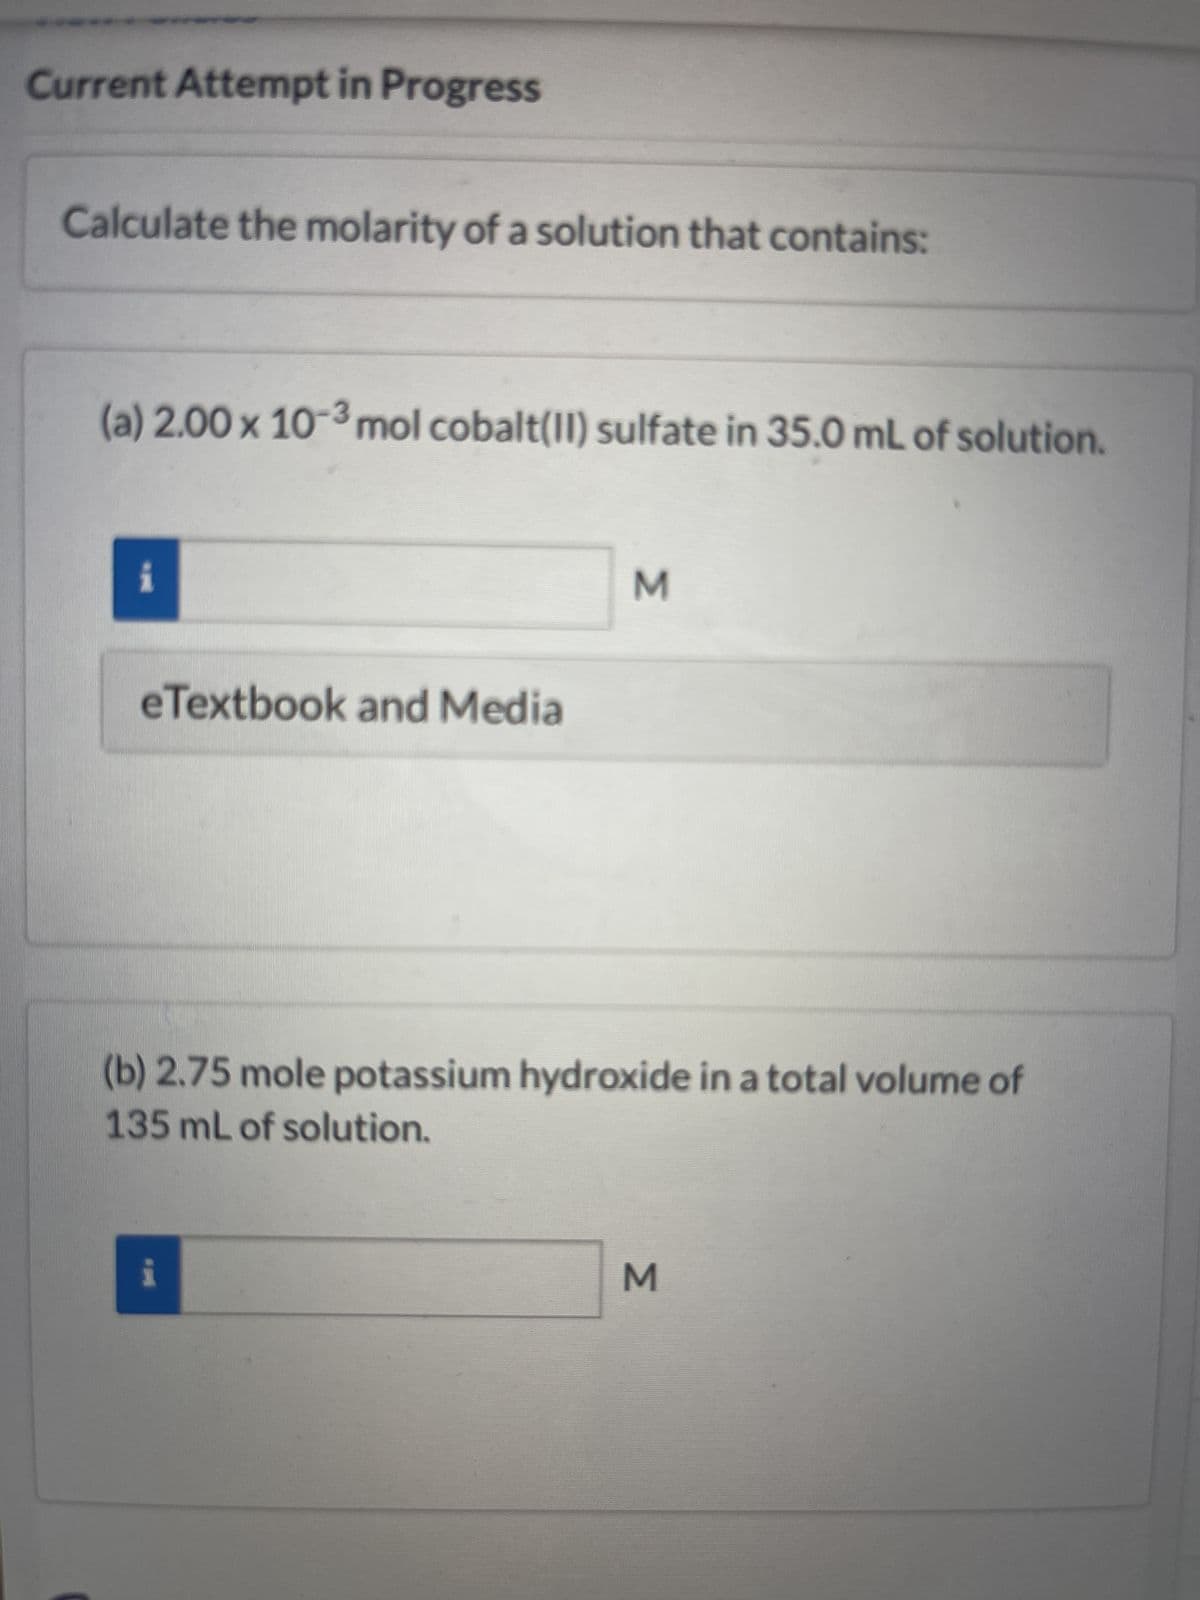 Current Attempt in Progress
Calculate the molarity of a solution that contains:
(a) 2.00 x 10-³ mol cobalt(II) sulfate in 35.0 mL of solution.
i
eTextbook and Media
M
(b) 2.75 mole potassium hydroxide in a total volume of
135 mL of solution.
M